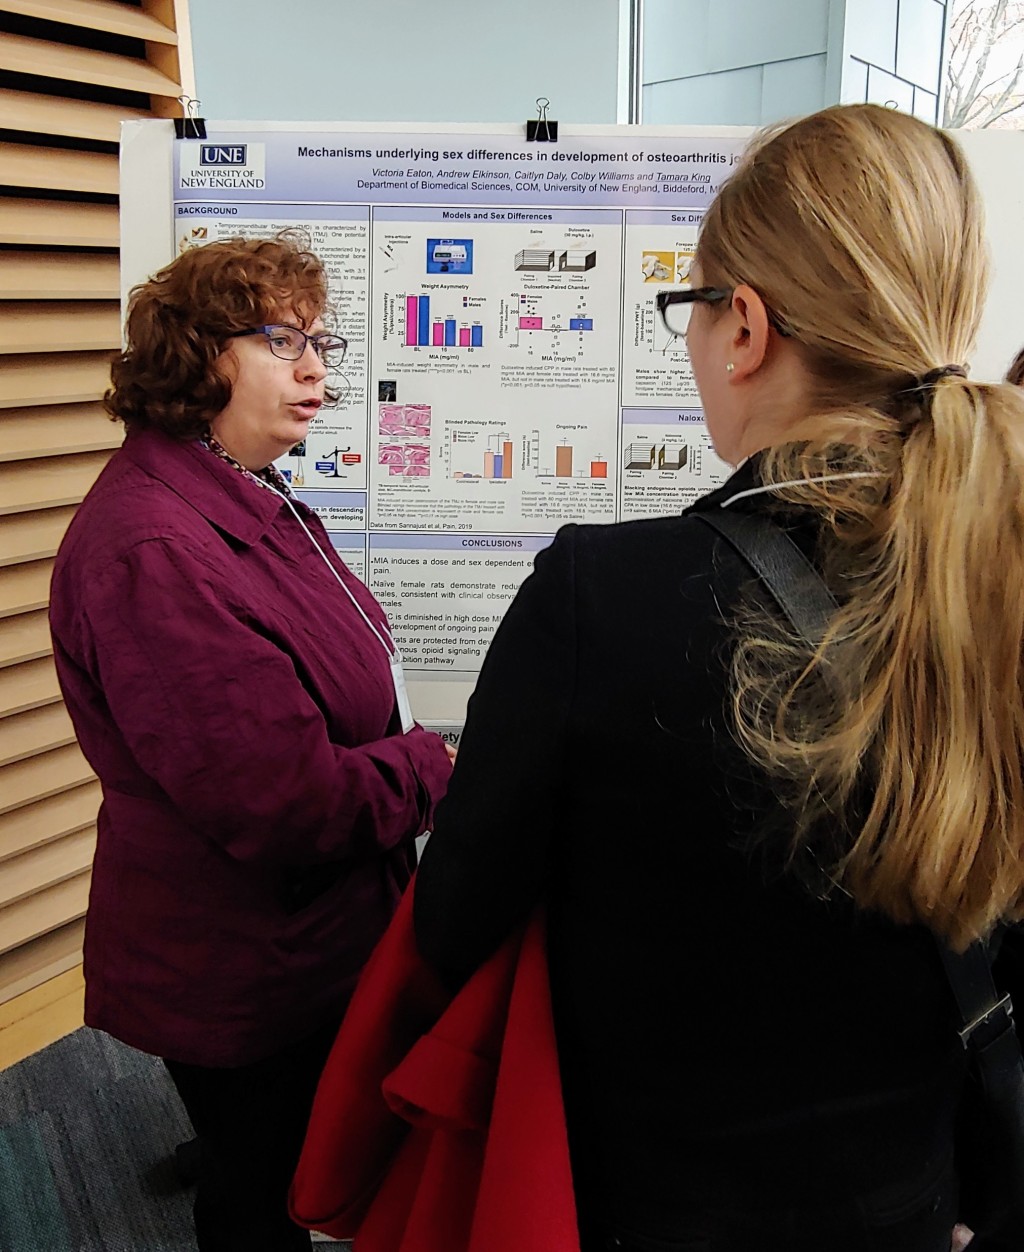 Tamara King of the Department of Biomedical Sciences discusses her research poster